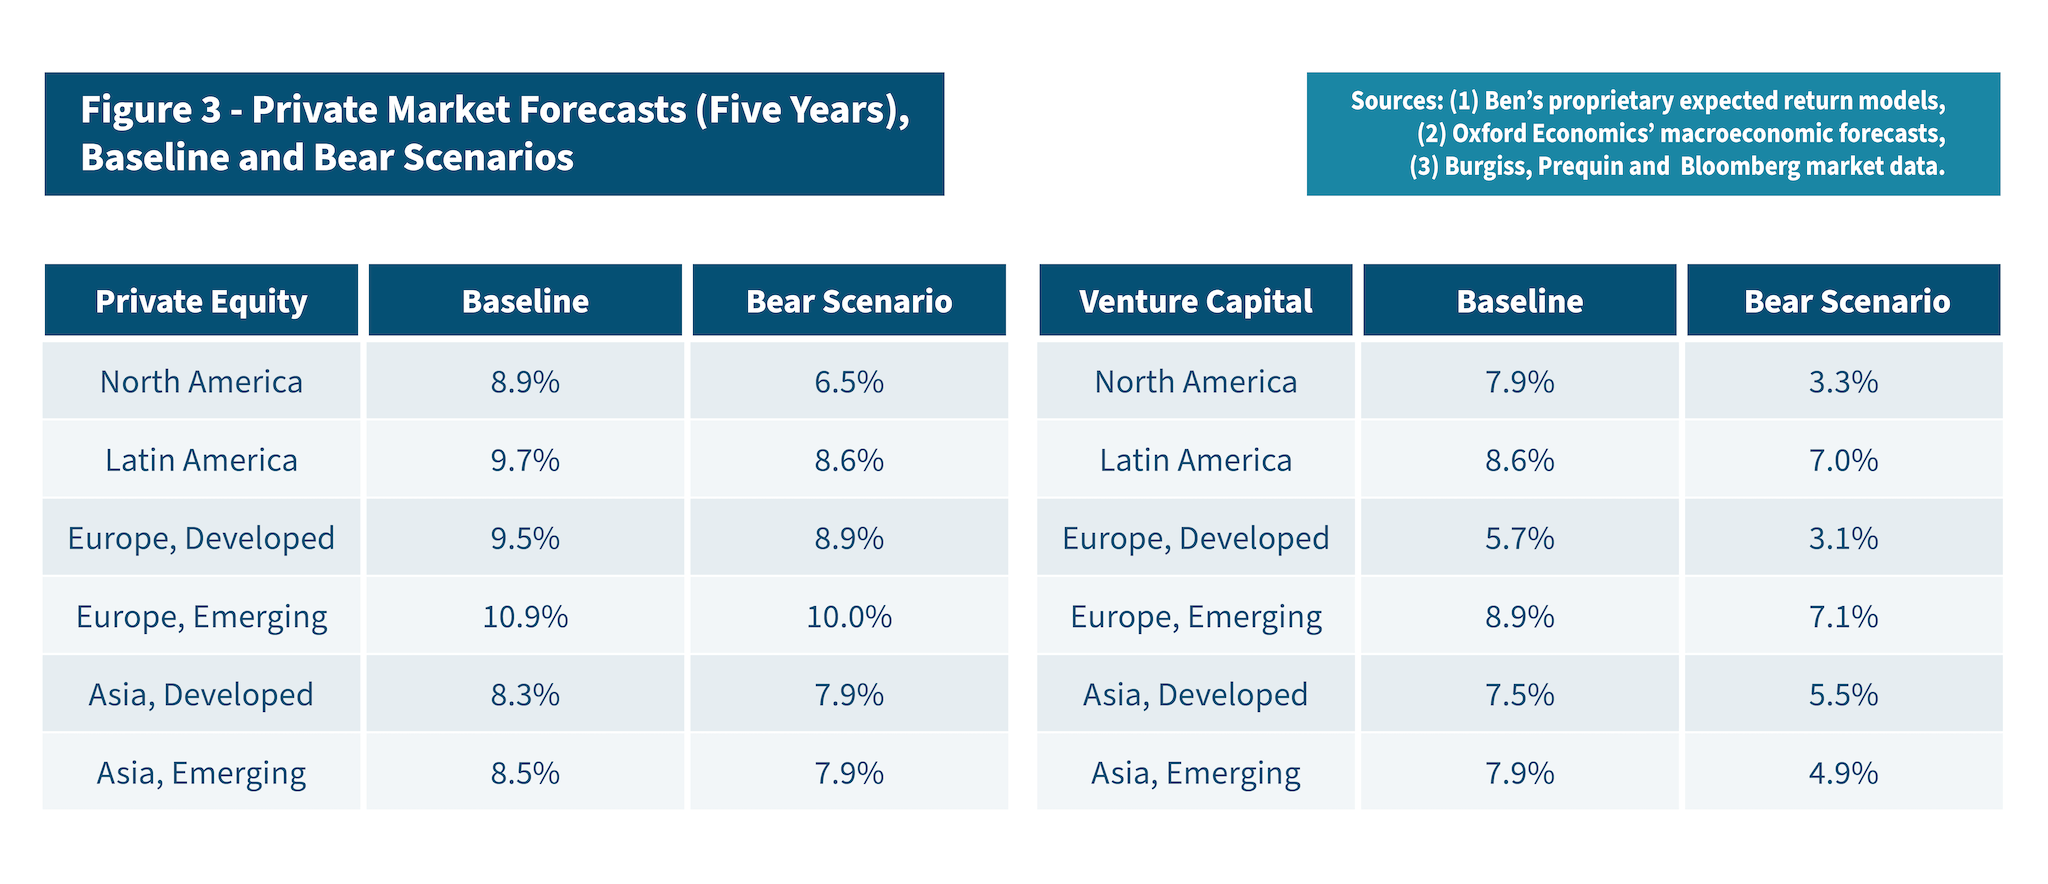 Figure 3: Table shows five-year private market forecasts, including baseline and bear scenarios, for both private equity and venture capital.